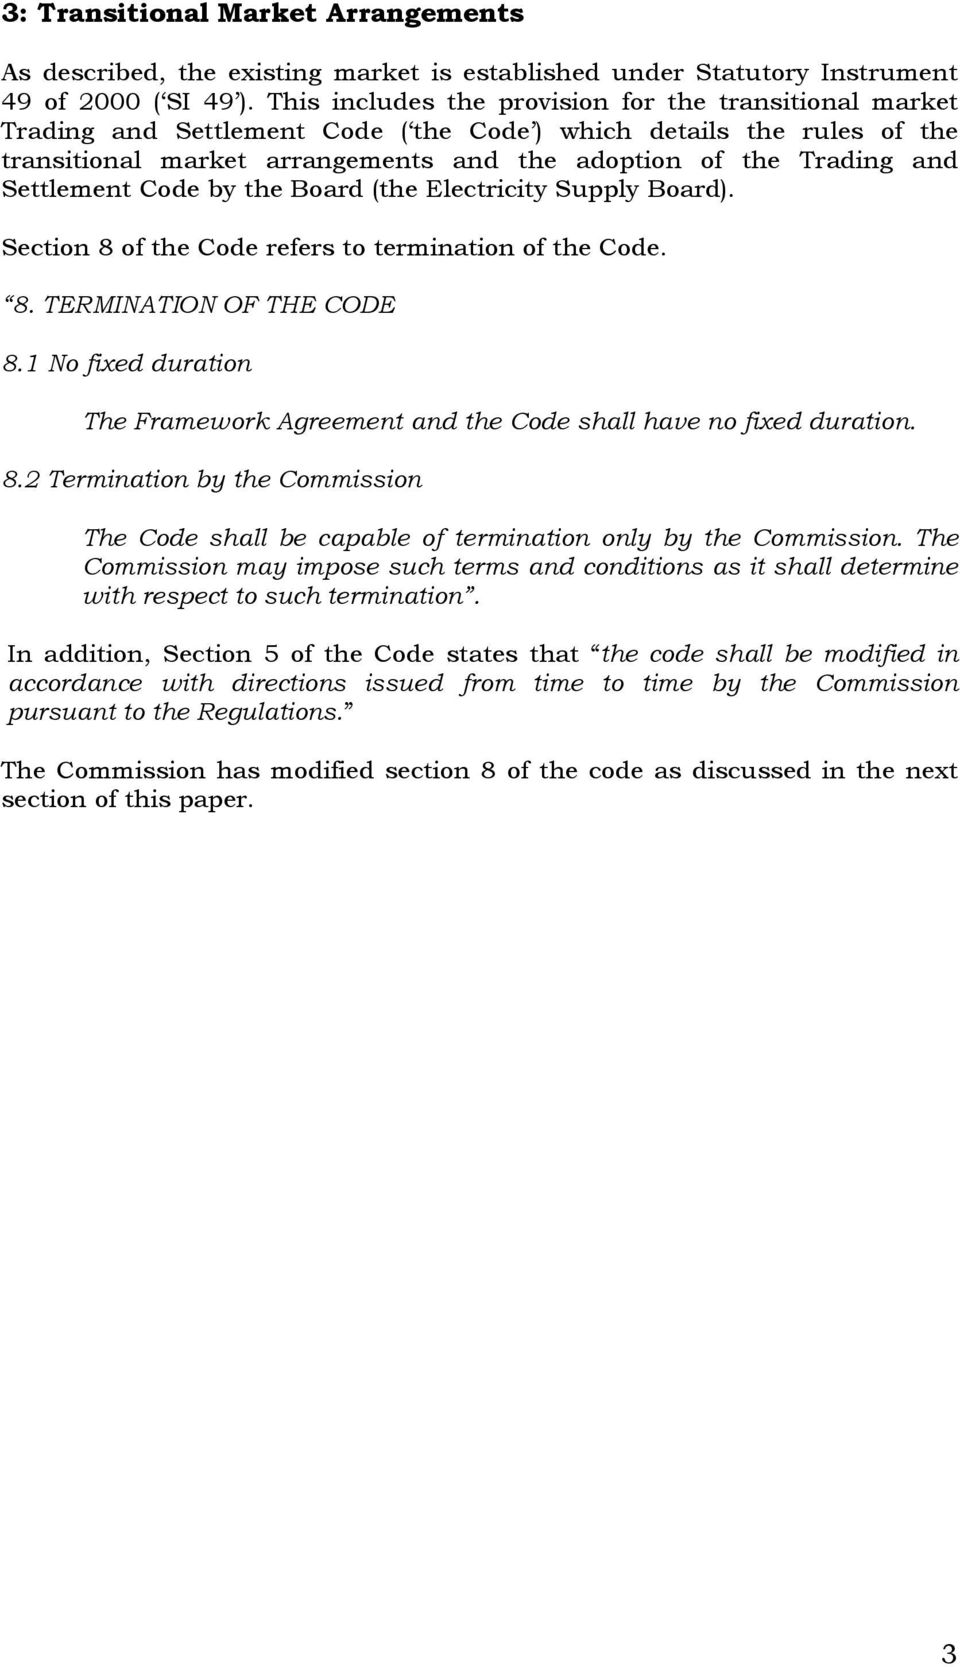 Settlement Code by the Board (the Electricity Supply Board). Section 8 of the Code refers to termination of the Code. 8. TERMINATION OF THE CODE 8.